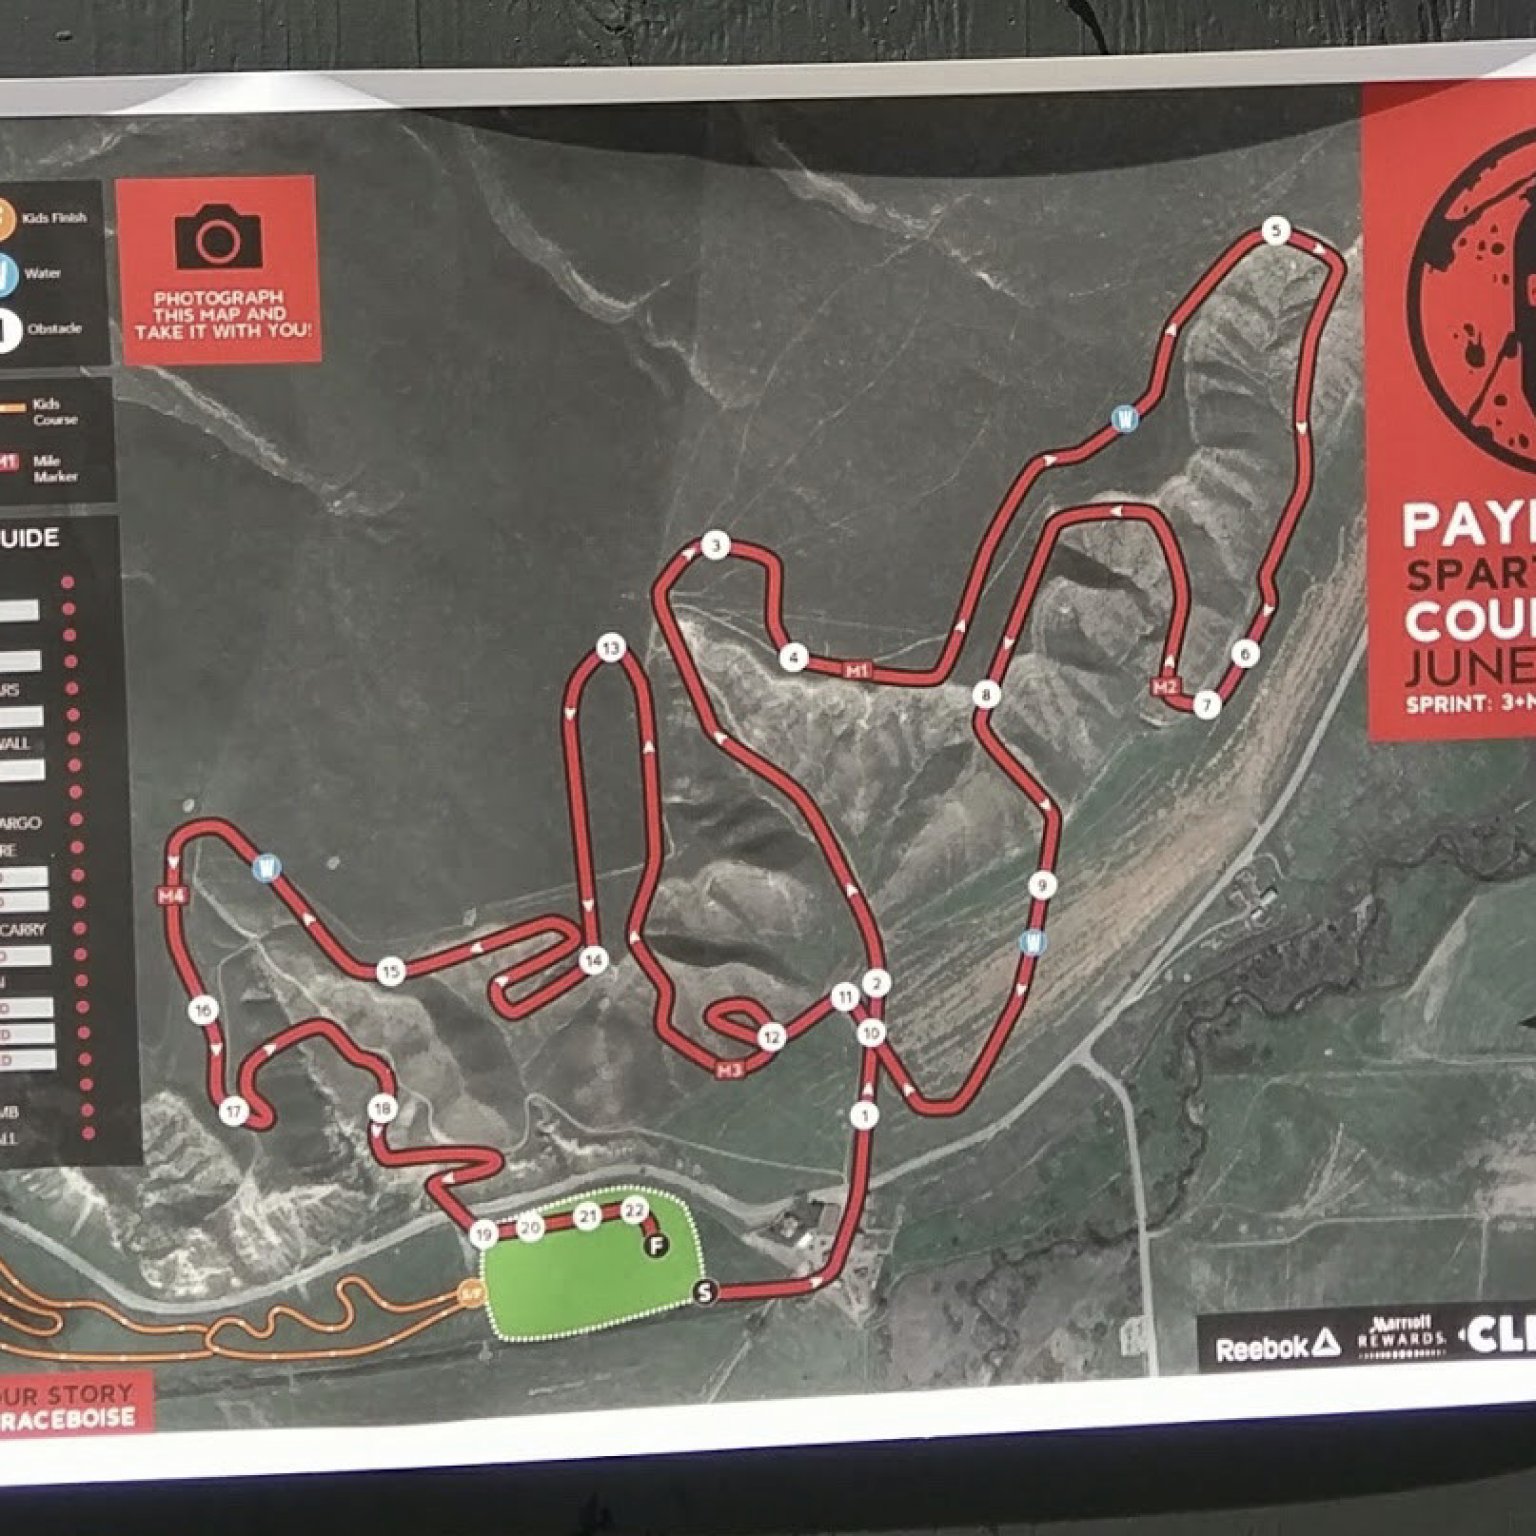 What Should I Expect At My First Spartan Race?